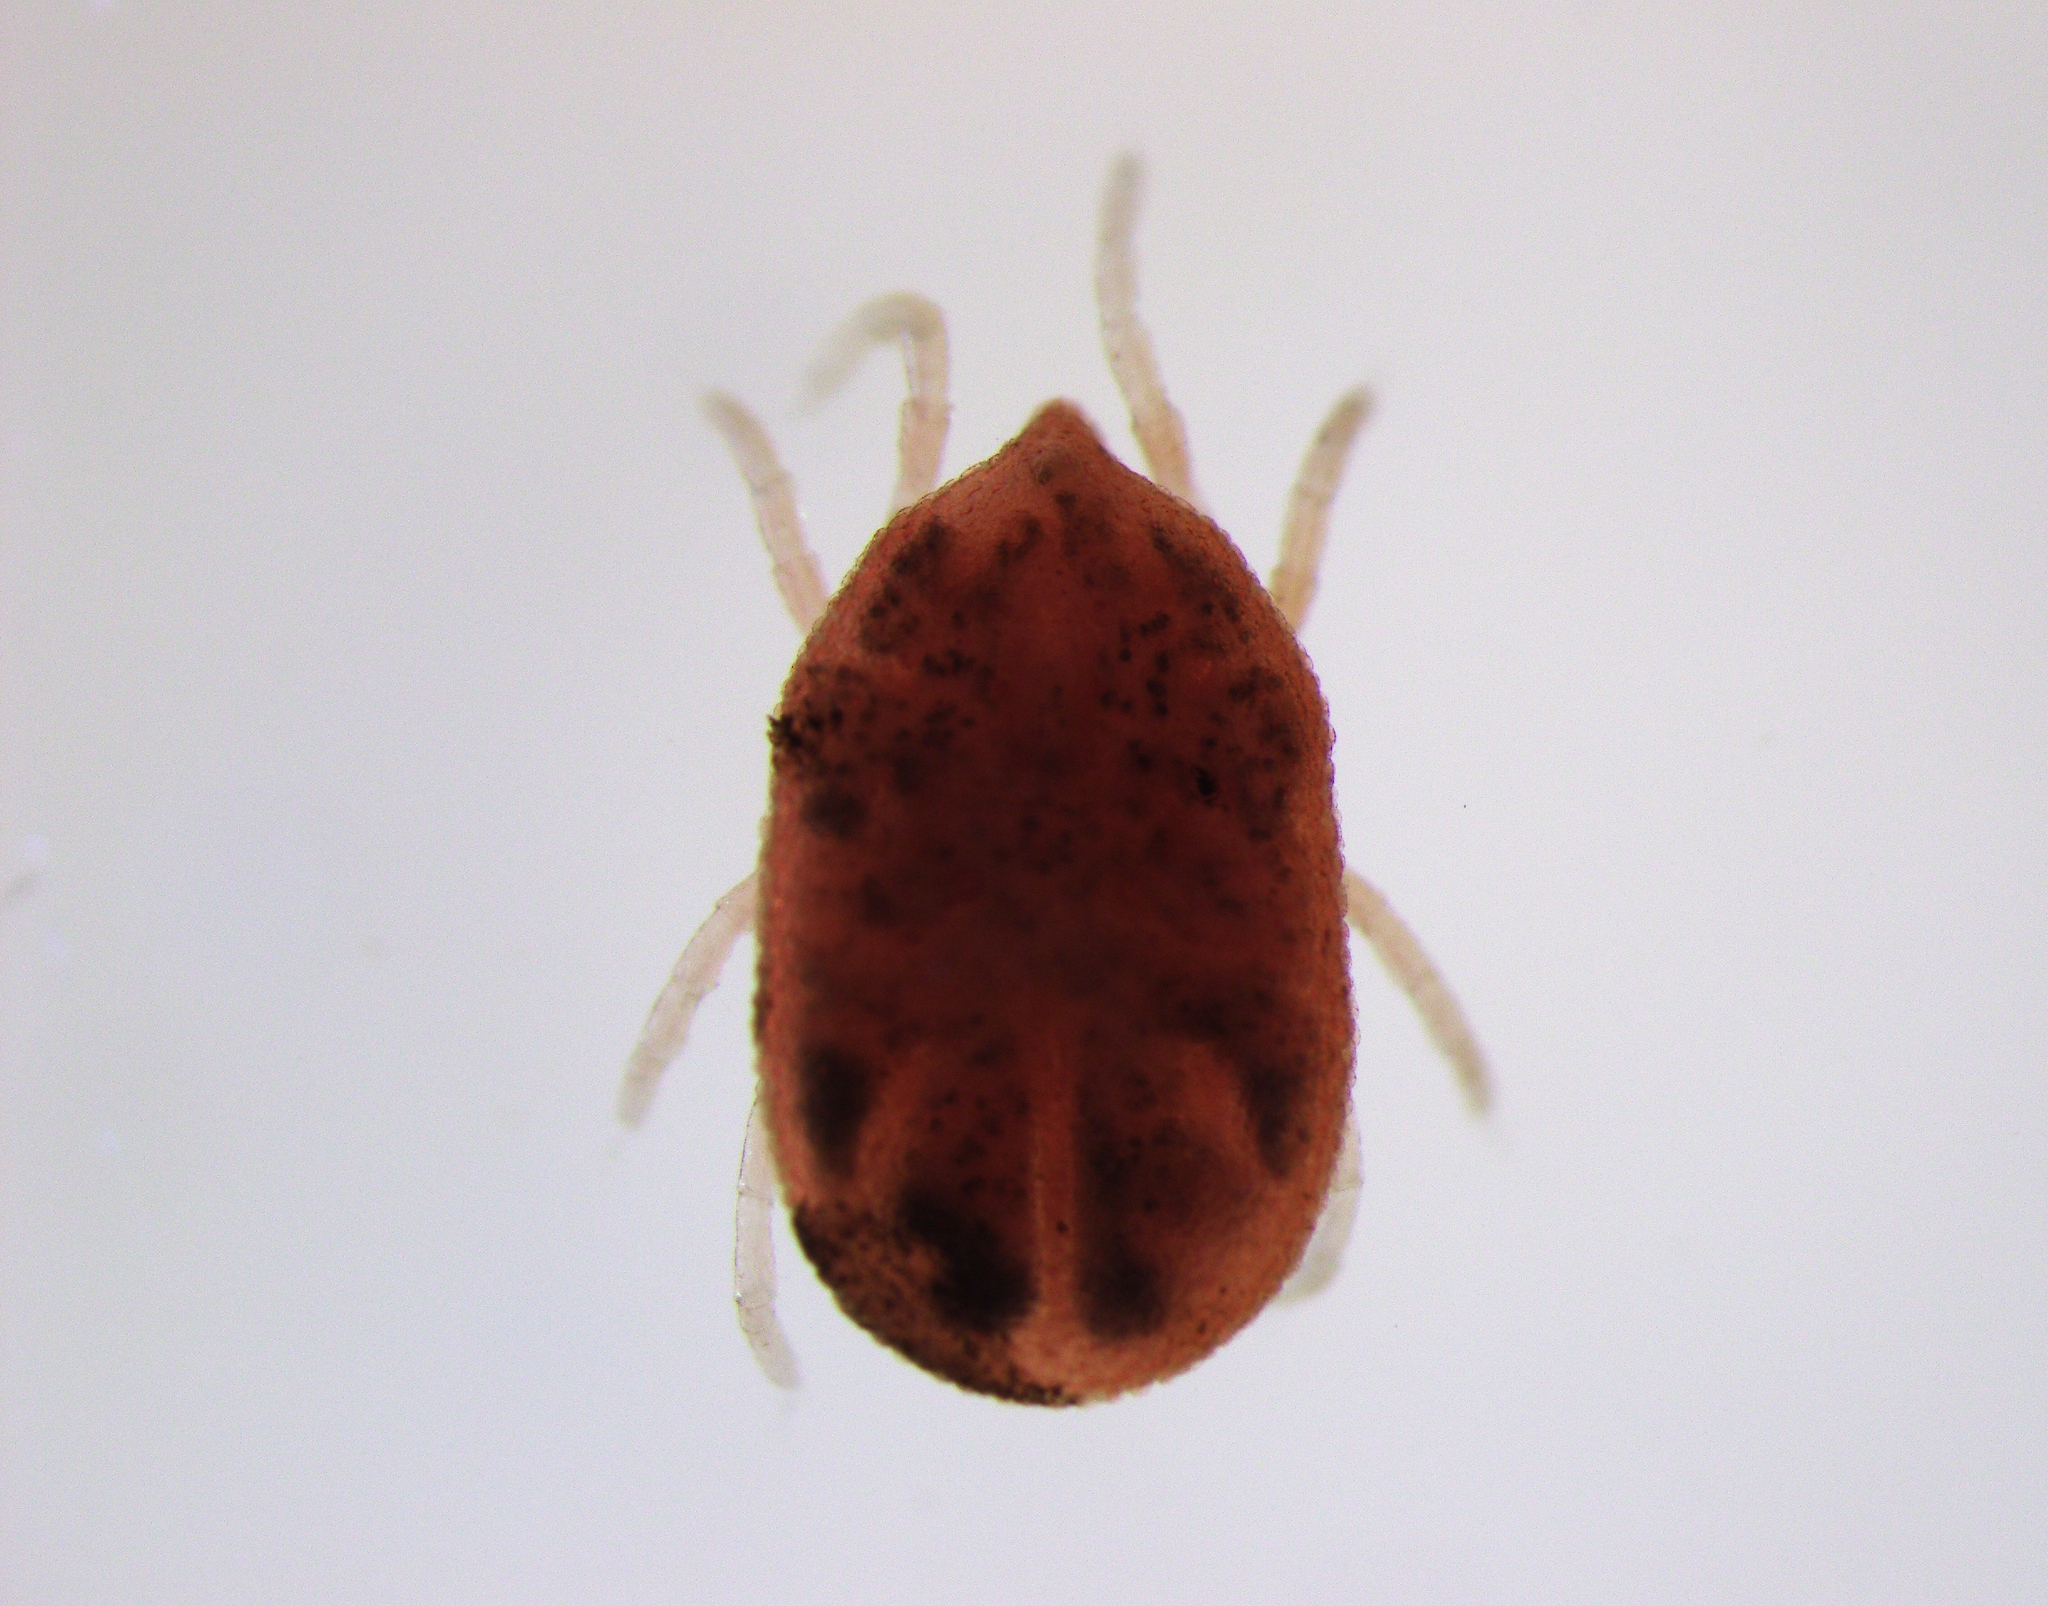 Photo of a soft tick, Ornithodoros hermsi, from the top.